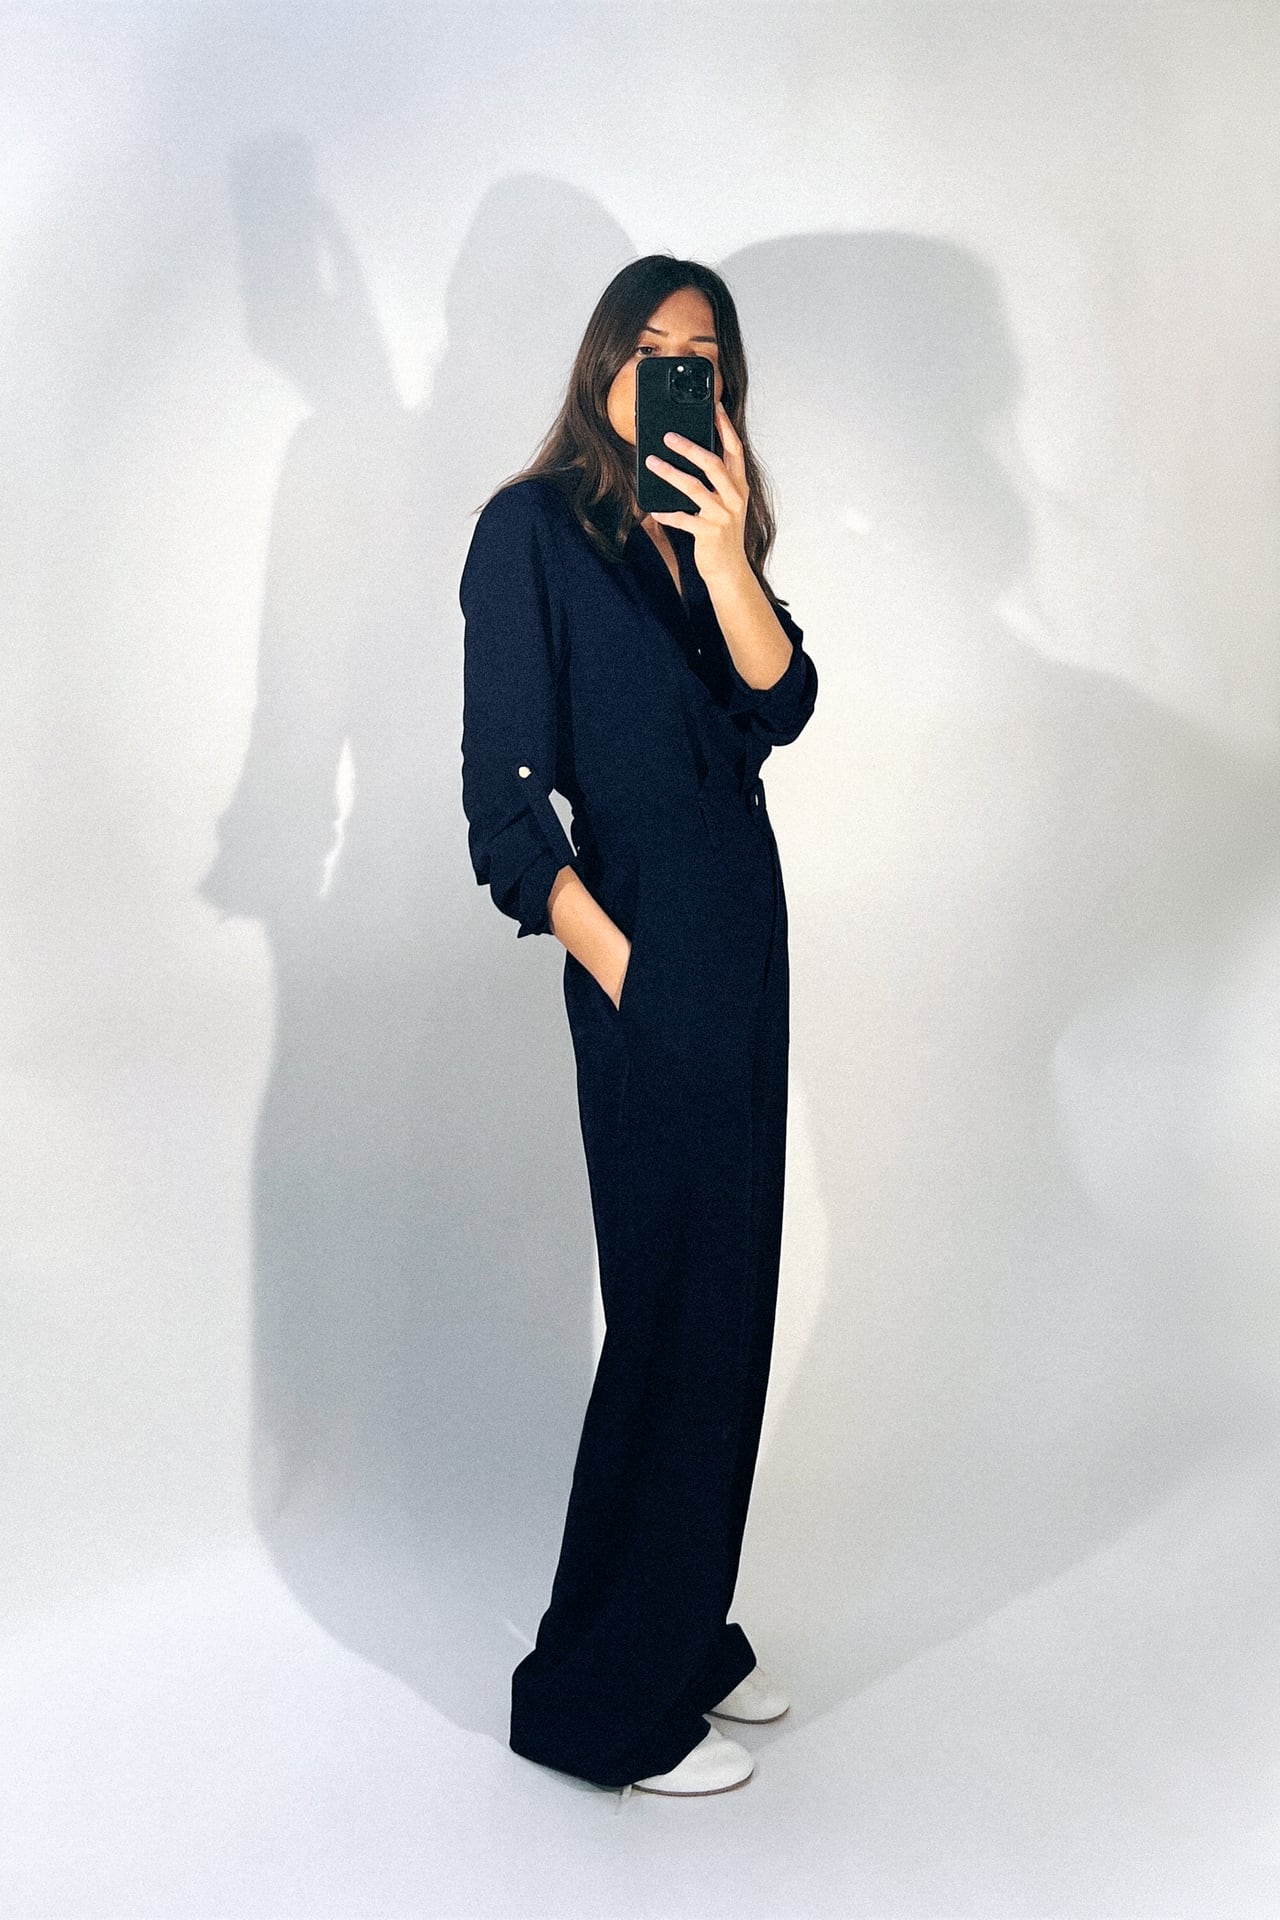 A person takes a mirror selfie, partially obscured by their phone, wearing a Zara wide-leg jumpsuit adorned with golden buttons. The navy color of the jumpsuit adds depth to the simplicity of the outfit, matched with understated white sneakers for a look that's both casual and chic.